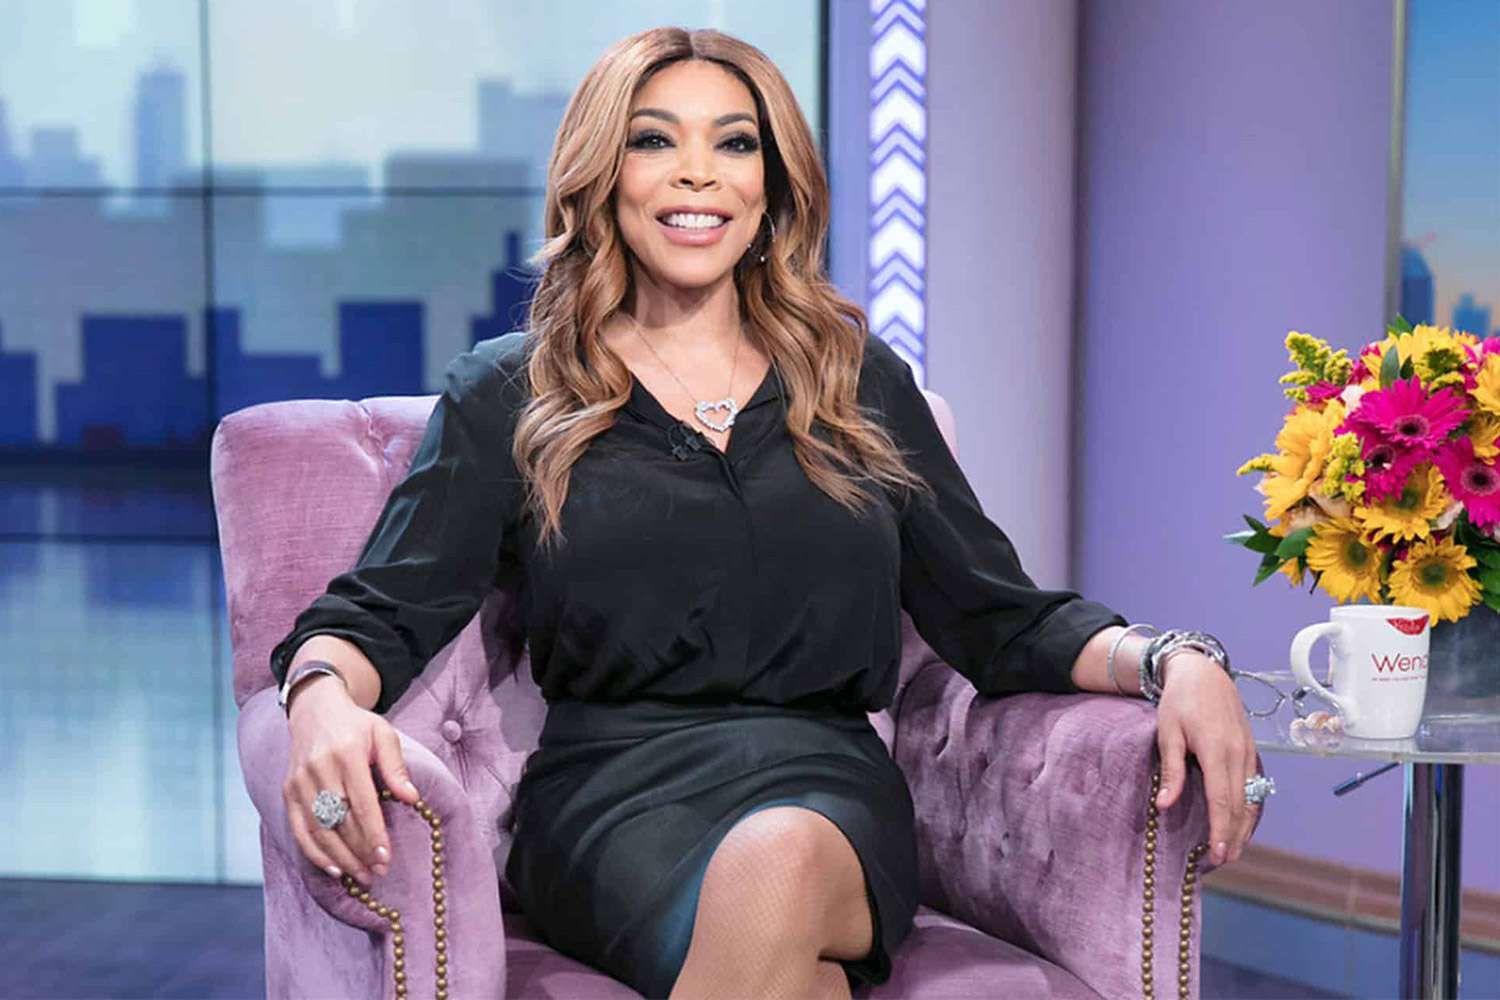 Wendy Williams Lifetime Show Sheds Light On Struggles And Excessive Drinking